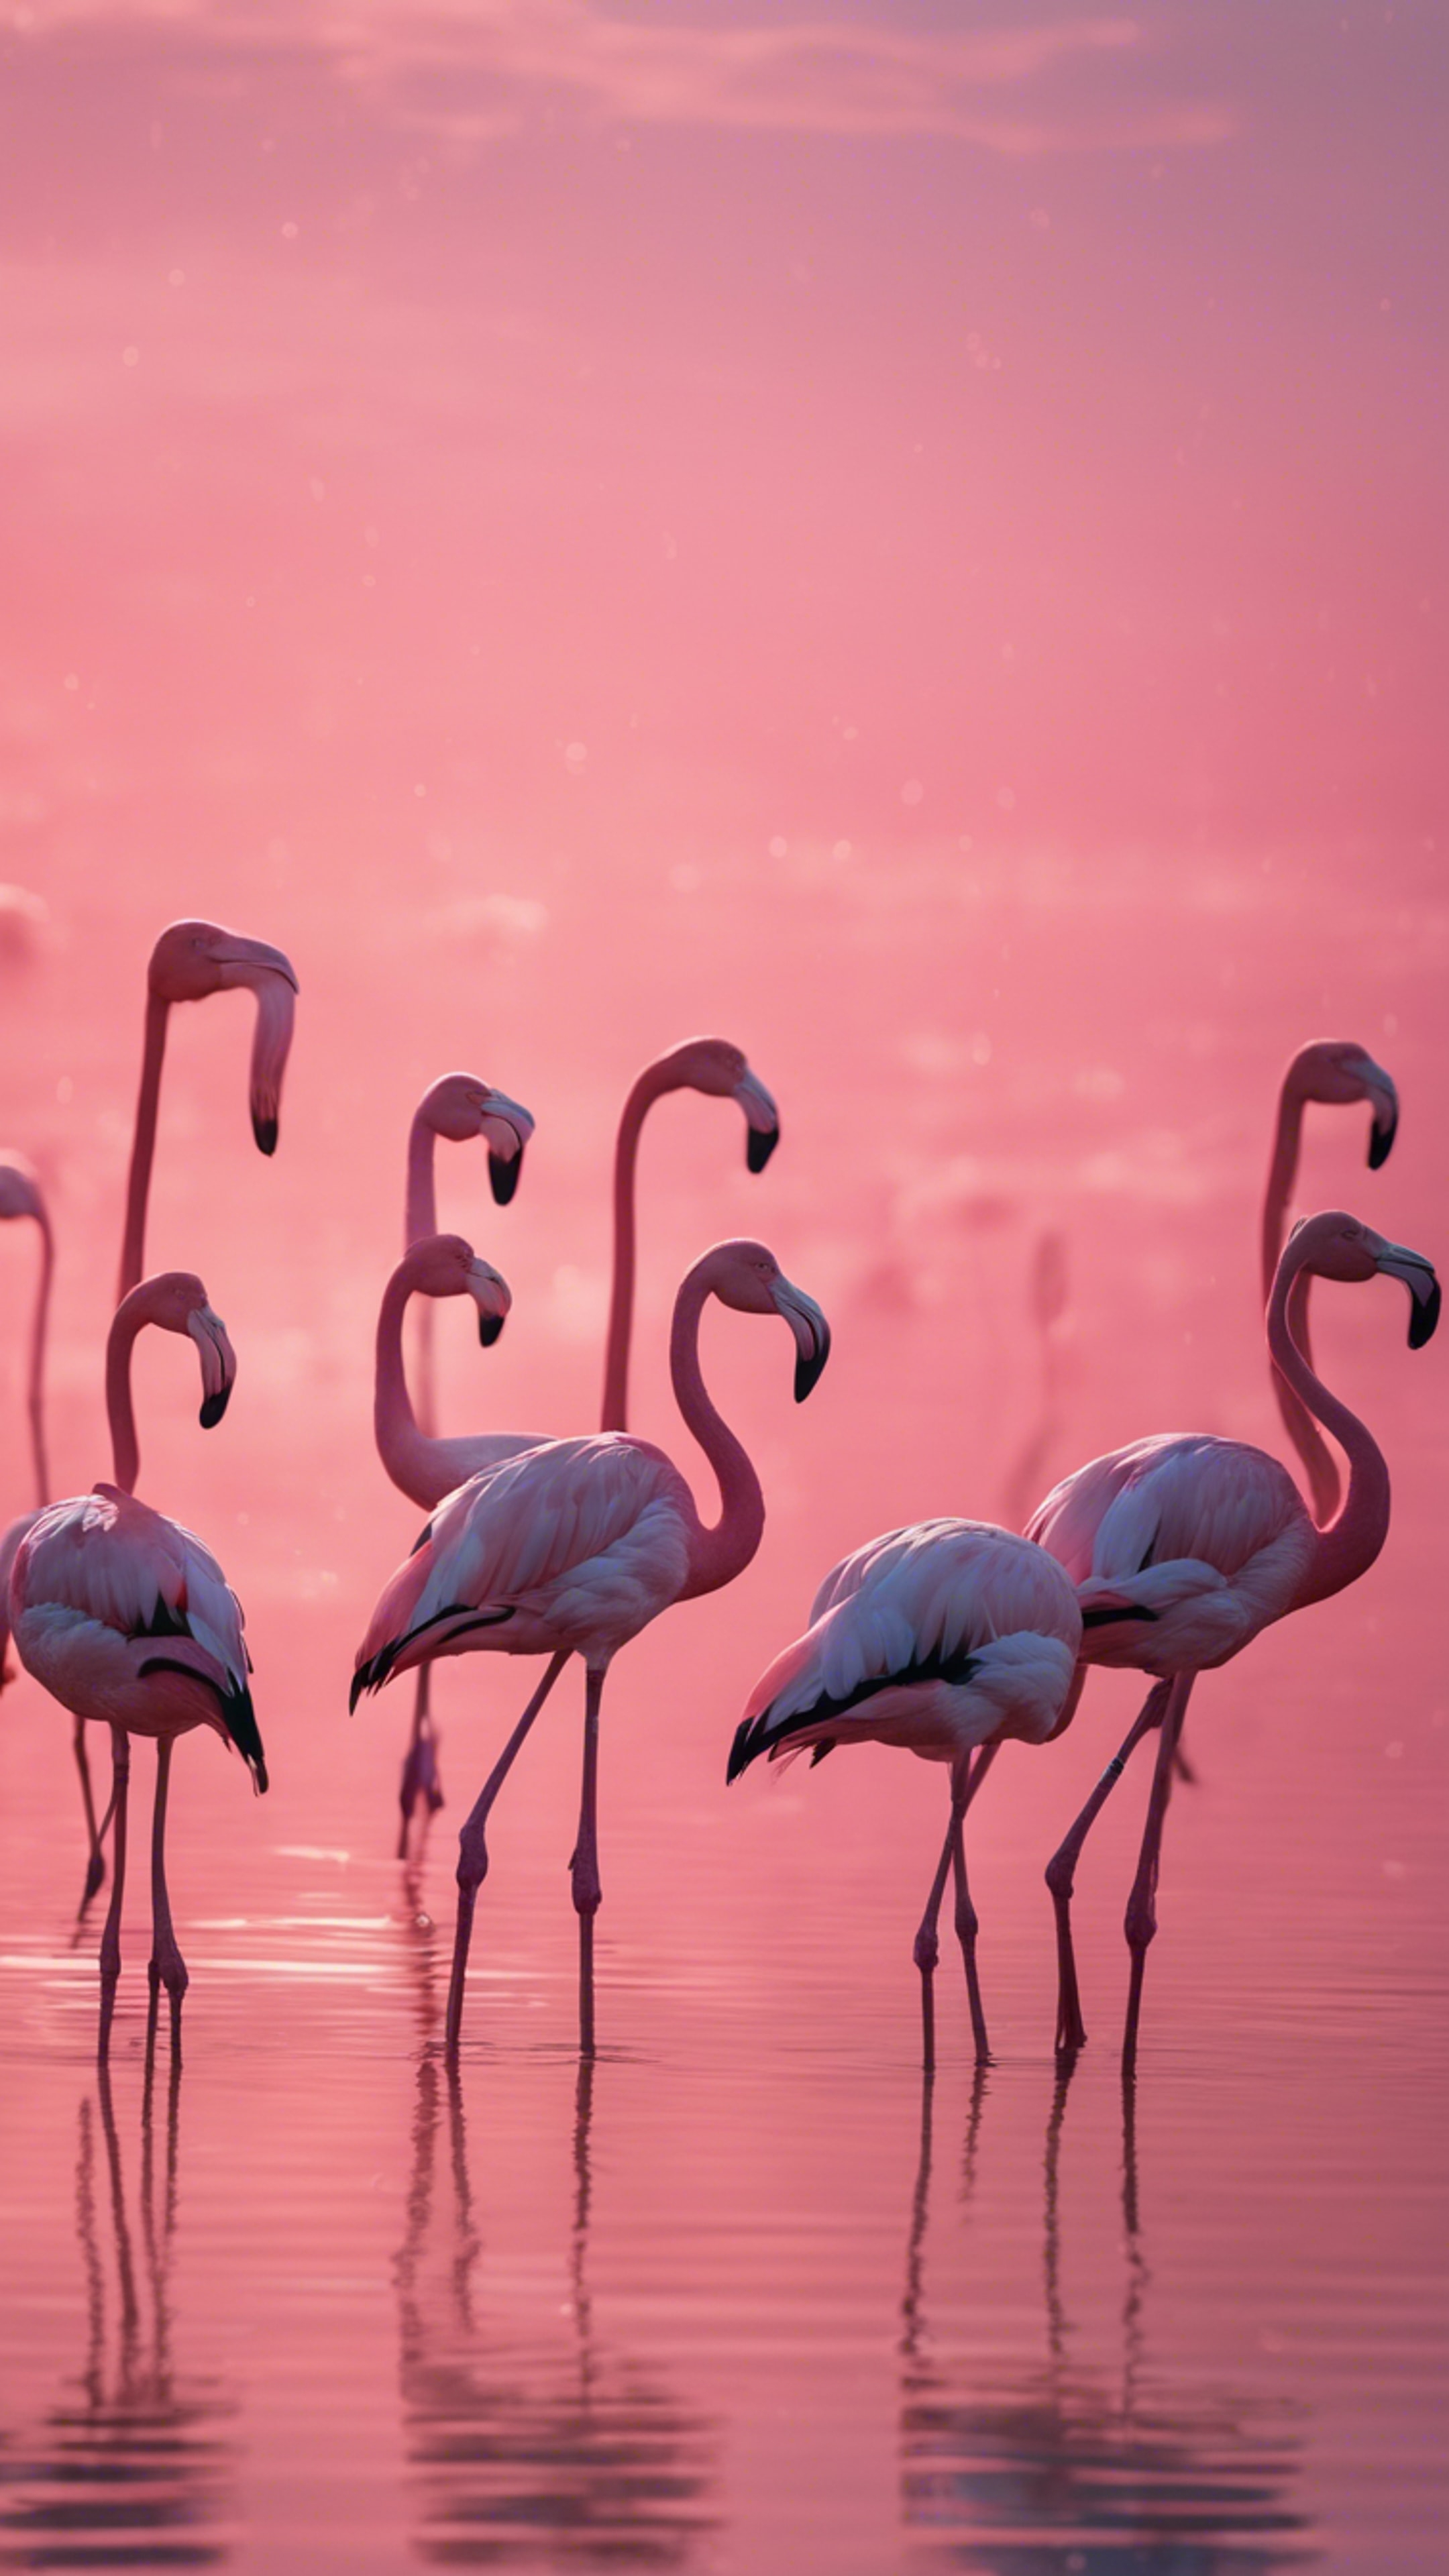 A flock of flamingoes standing in a calm, light pink waterbody during dusk. Wallpaper[b2c4914dc53a4cc1ae17]